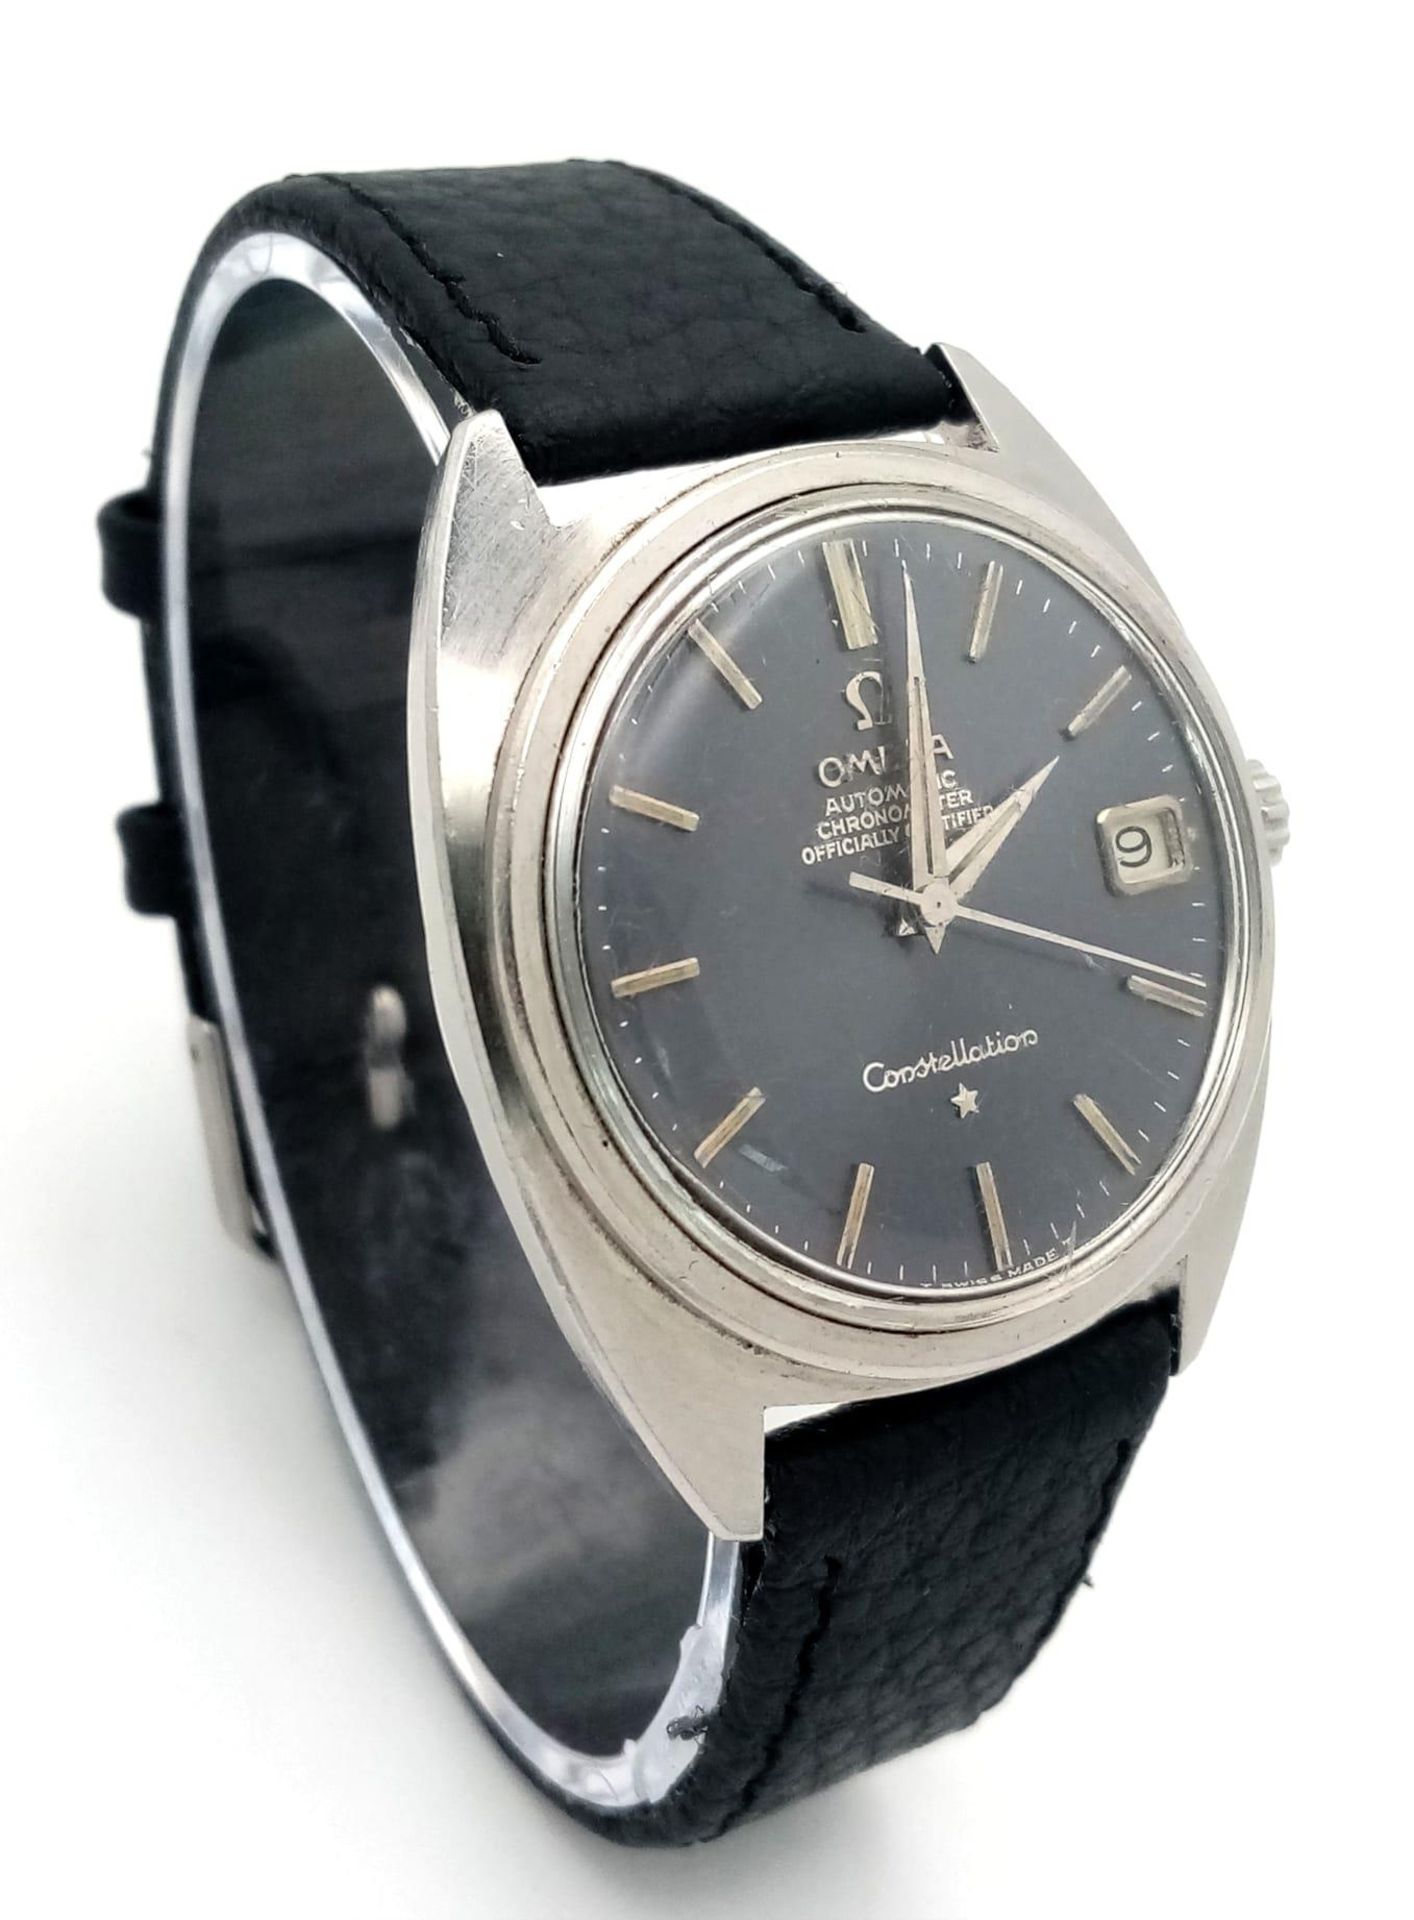 A Vintage Automatic Omega Constellation. Black leather strap. Stainless steel case - 36mm. Grey dial - Image 2 of 7